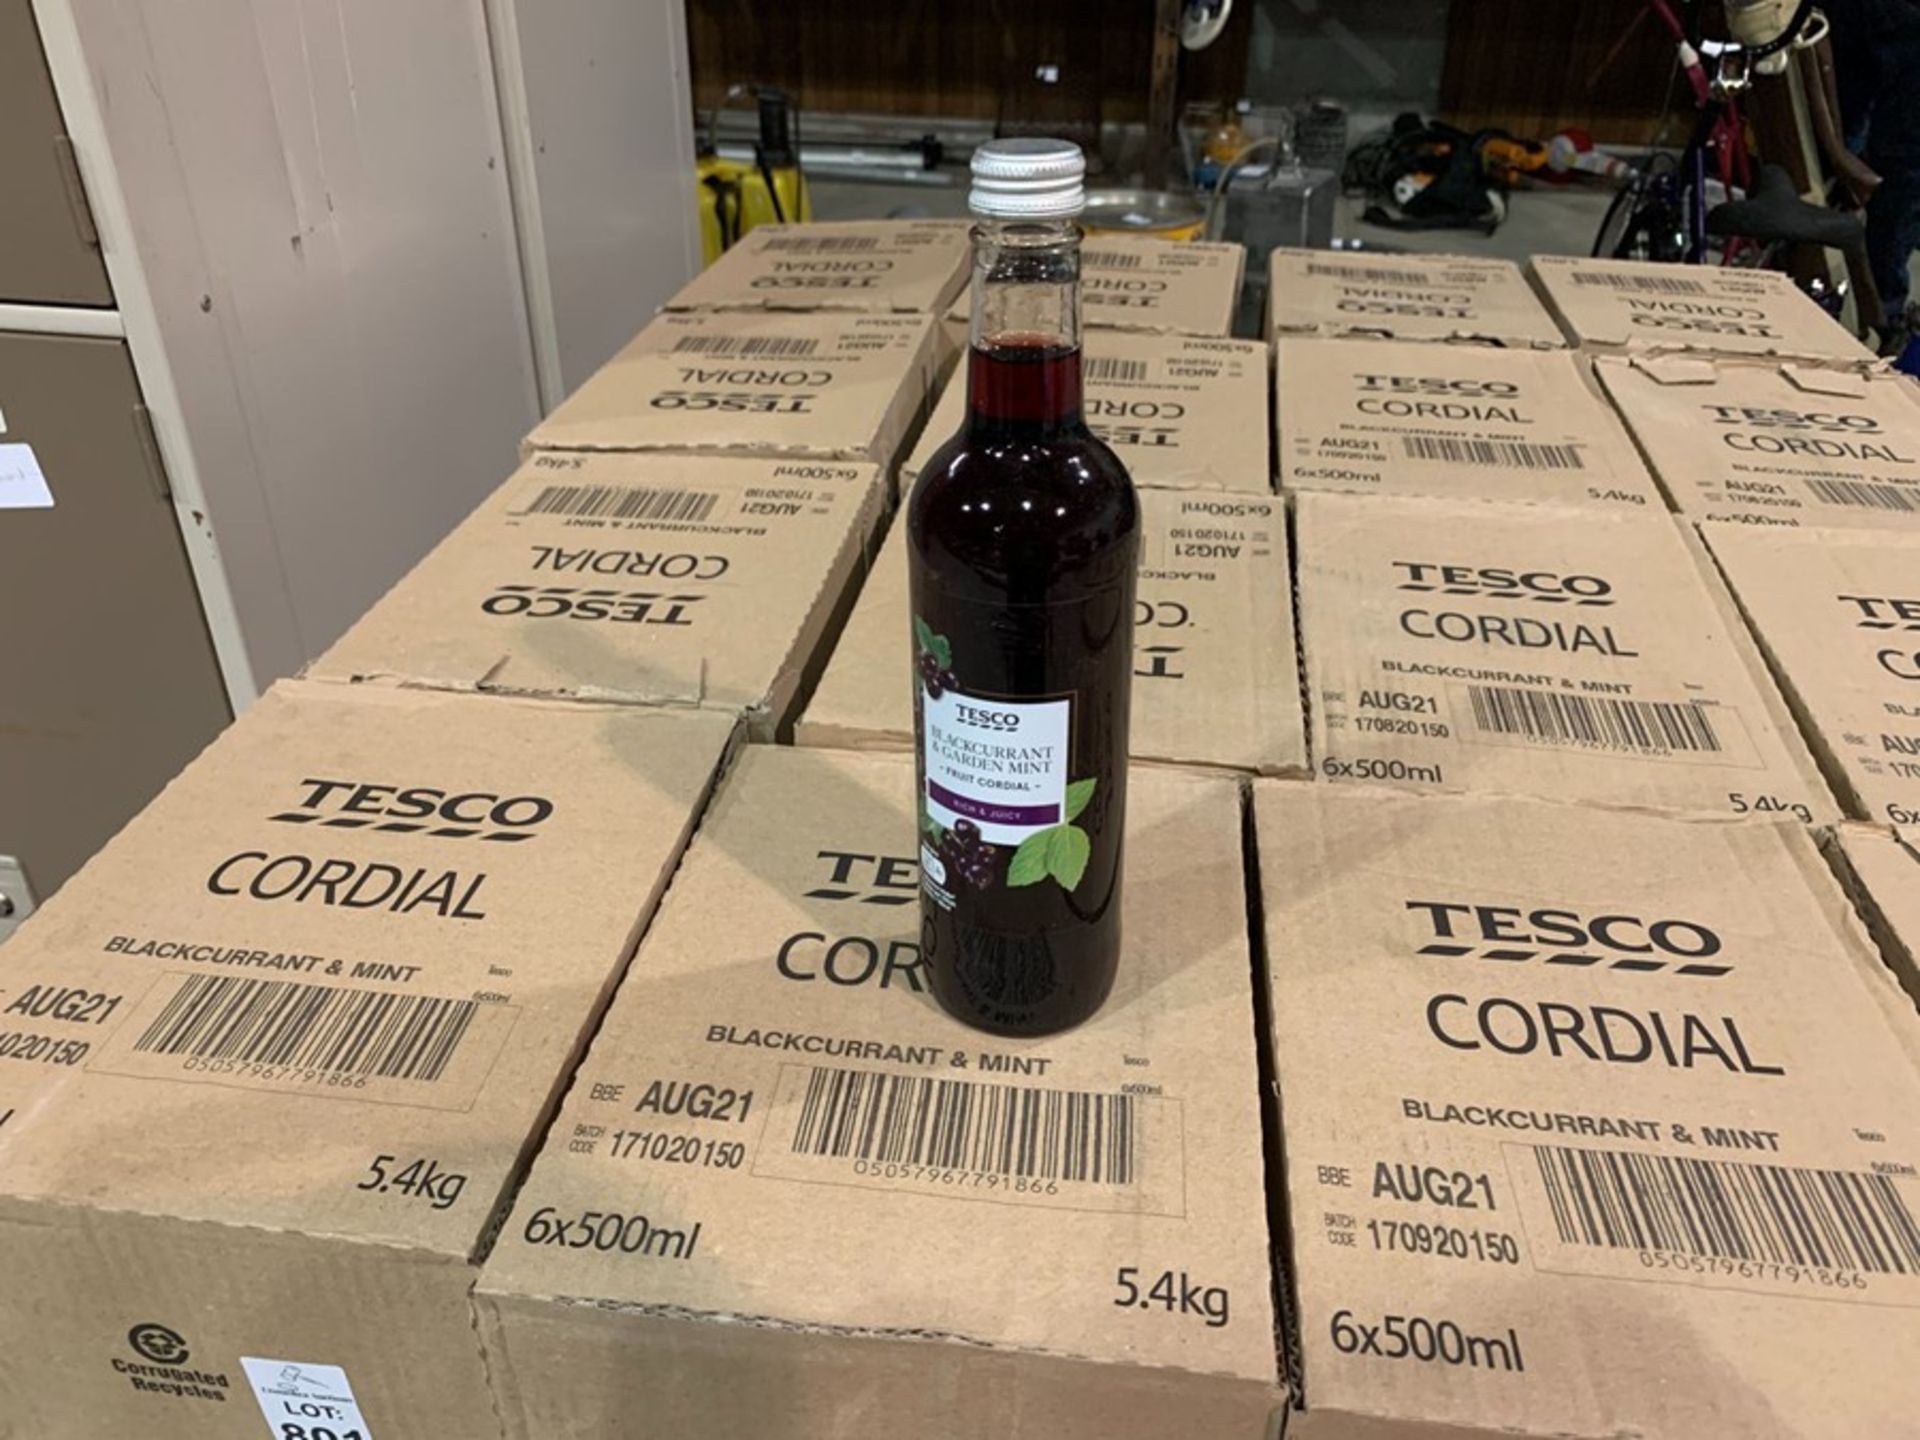 24 BOTTLES (4 BOXES) OF BLACKCURRANT AND MINT CORDIAL AUG 21